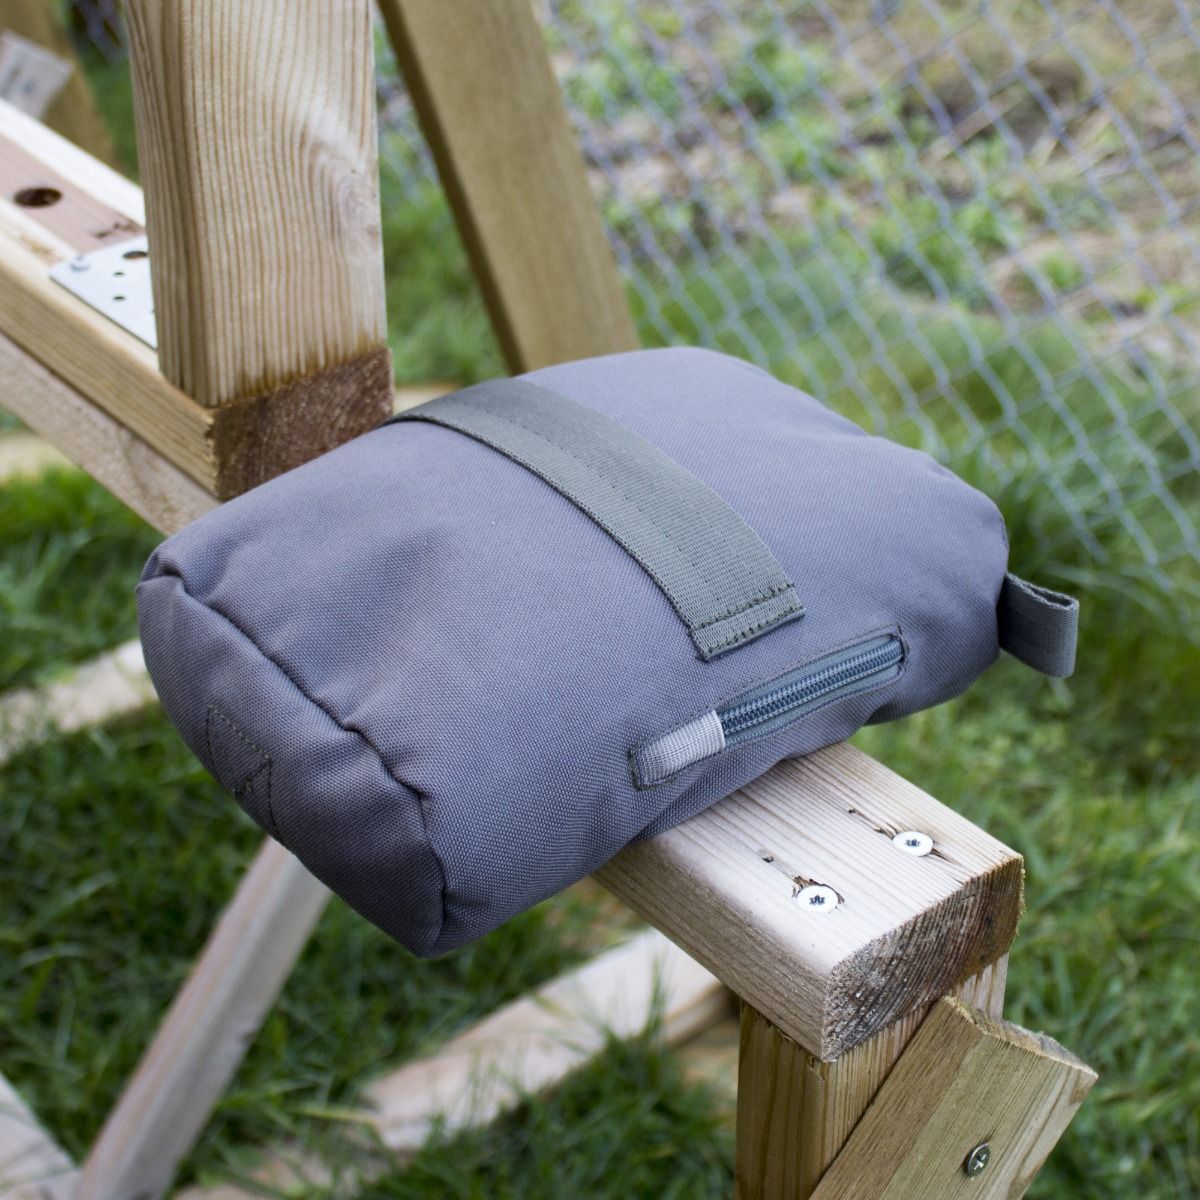 Ulfhednar Rear Support PRS Shooting Bag Rest "Cookie Dough" #UH103 - Australian Tactical Precision